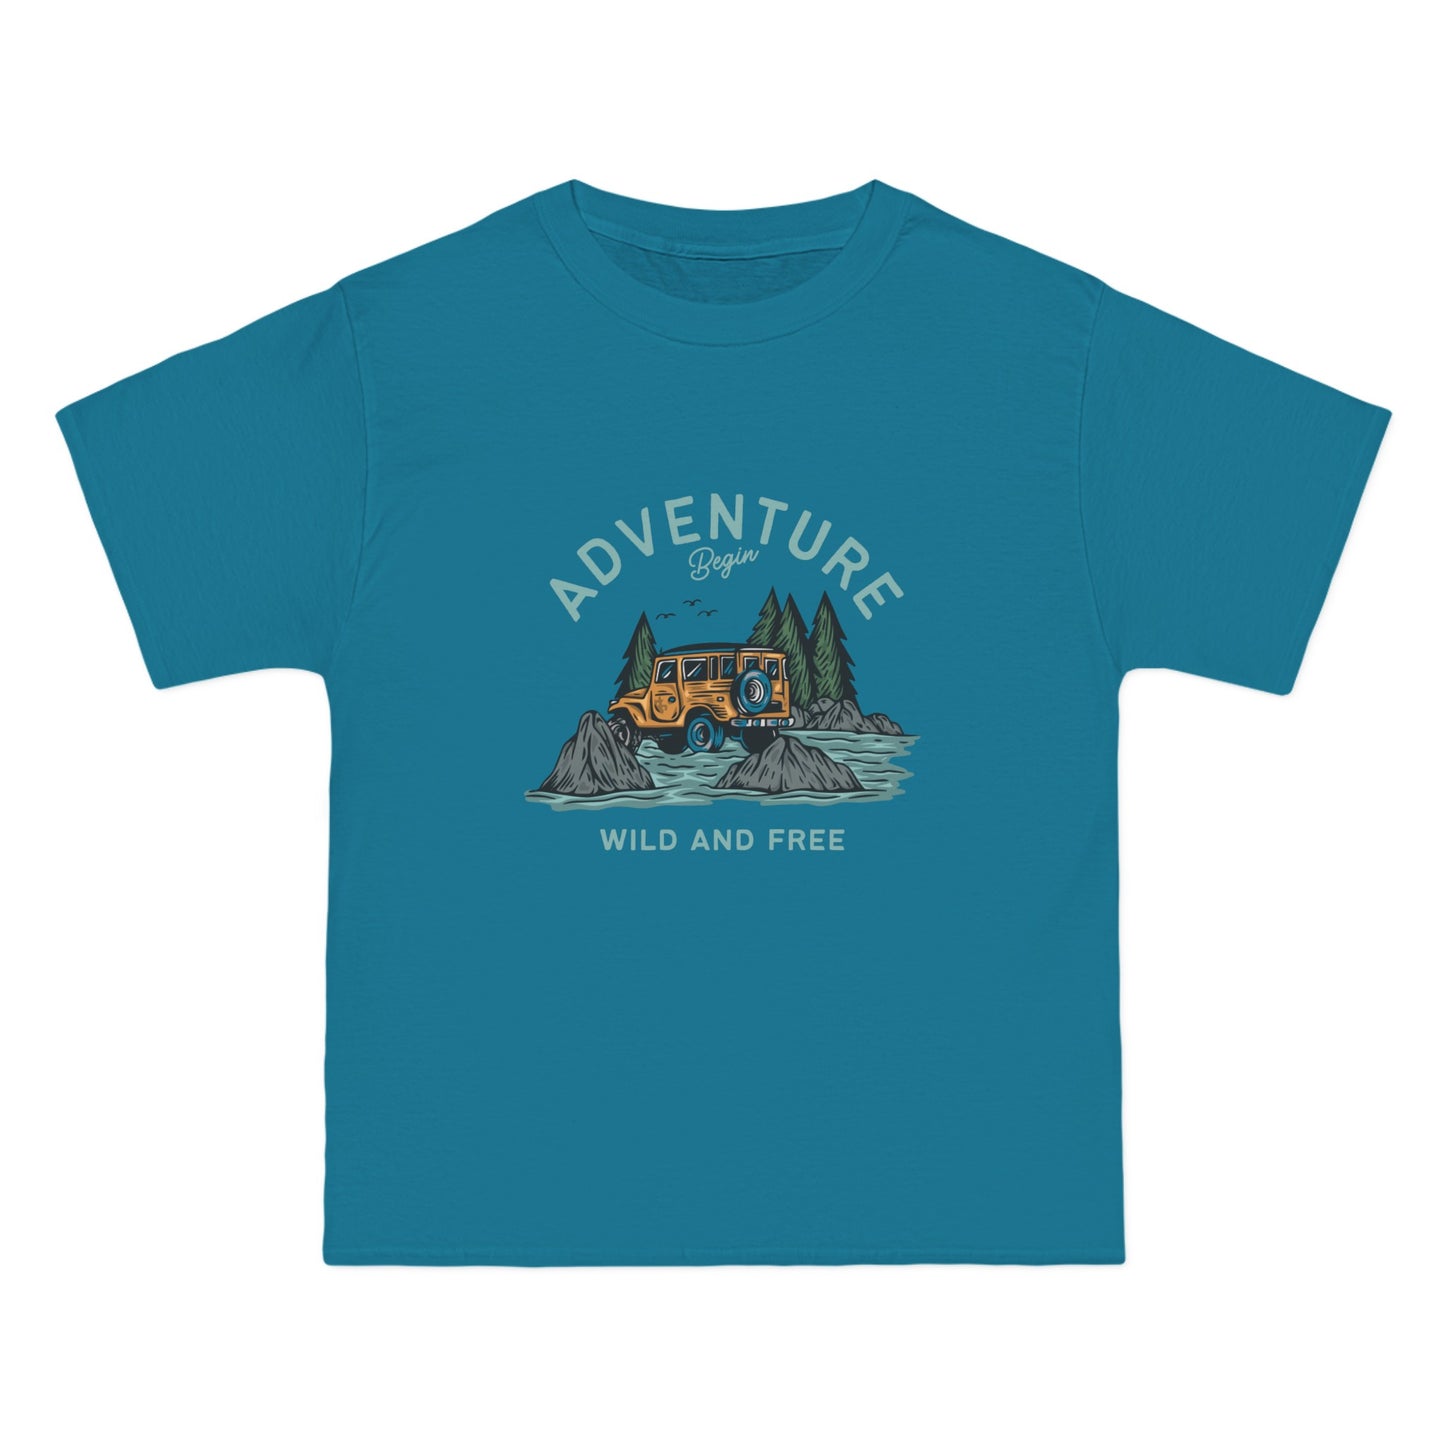 Crystal teal printed oversized Tshirt for men - Cozy Soul